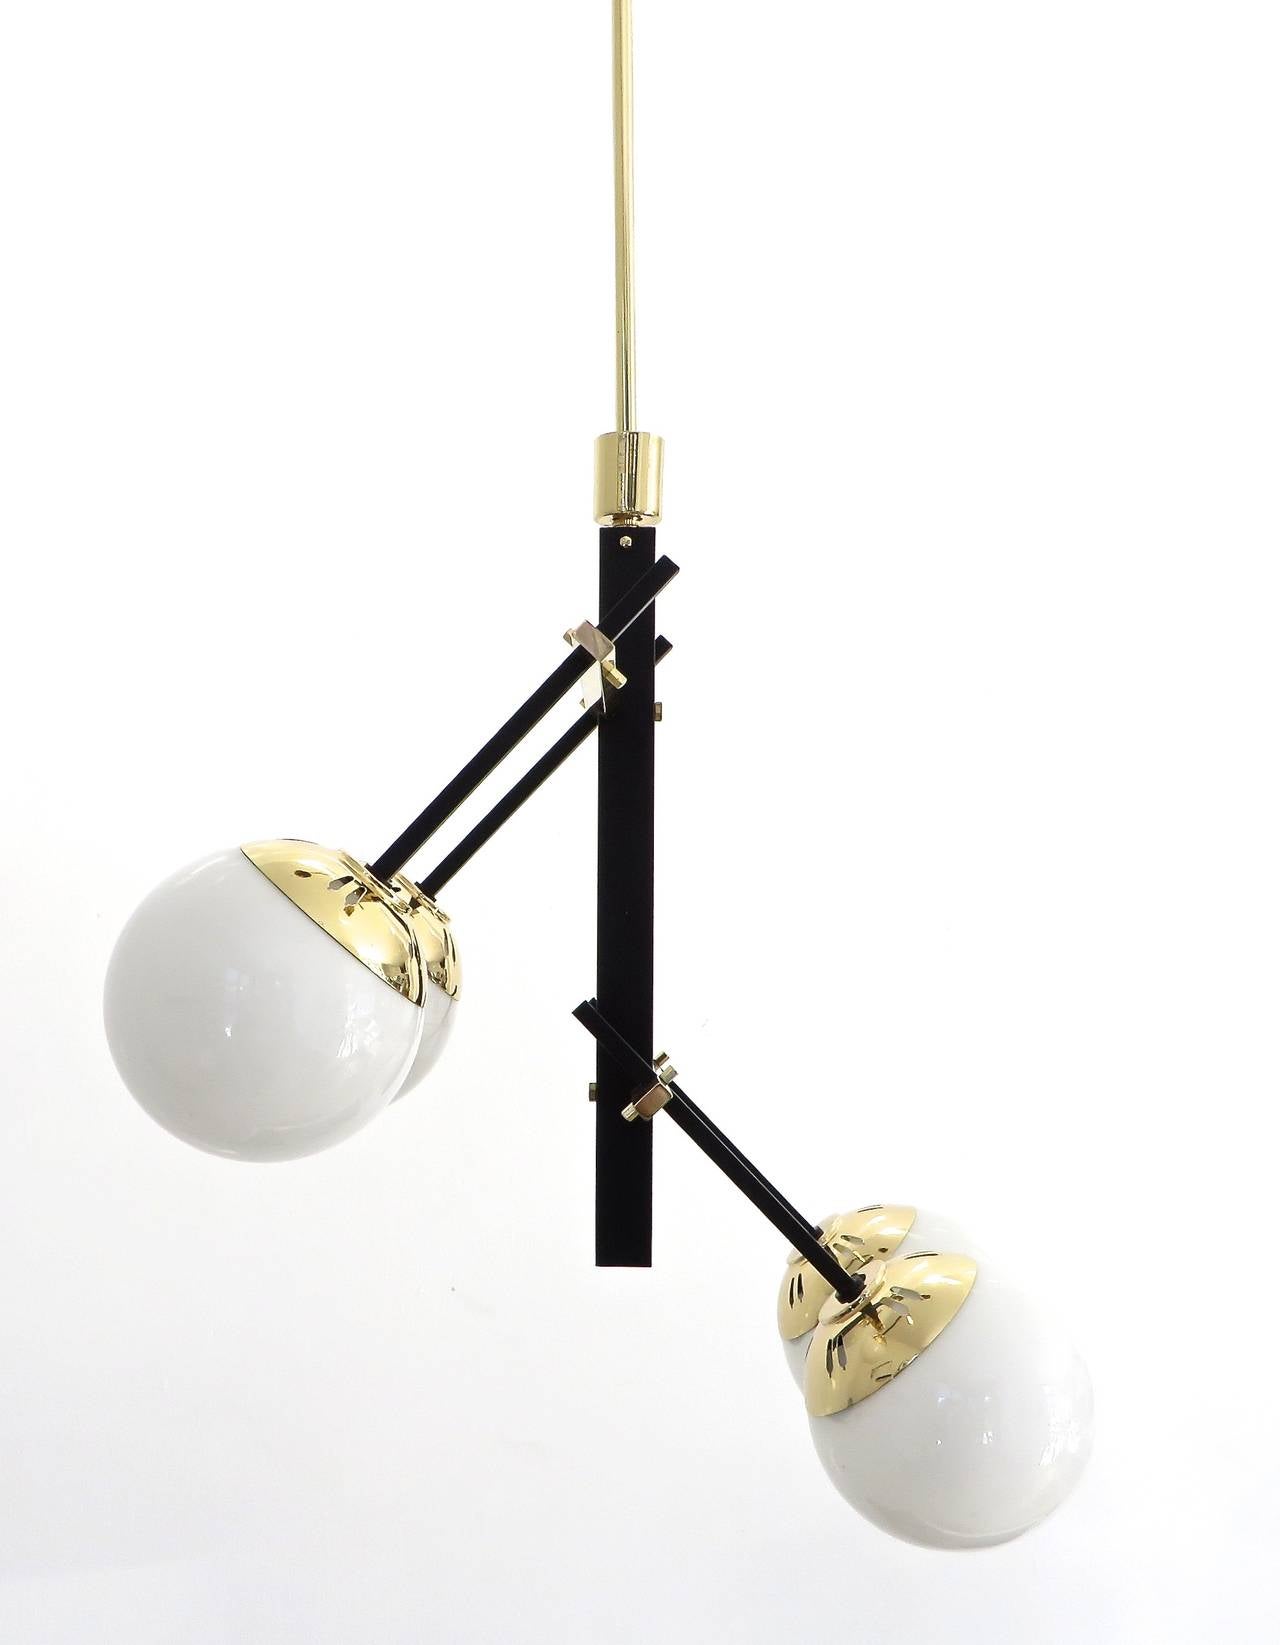 Asymmetric Italian brass, black lacquered brass and glass globe chandelier by Stilnovo.
The Stilnovo look includes large use of black stem and rods and polished brass elements.
Measurement is as shown size, each globe is 5